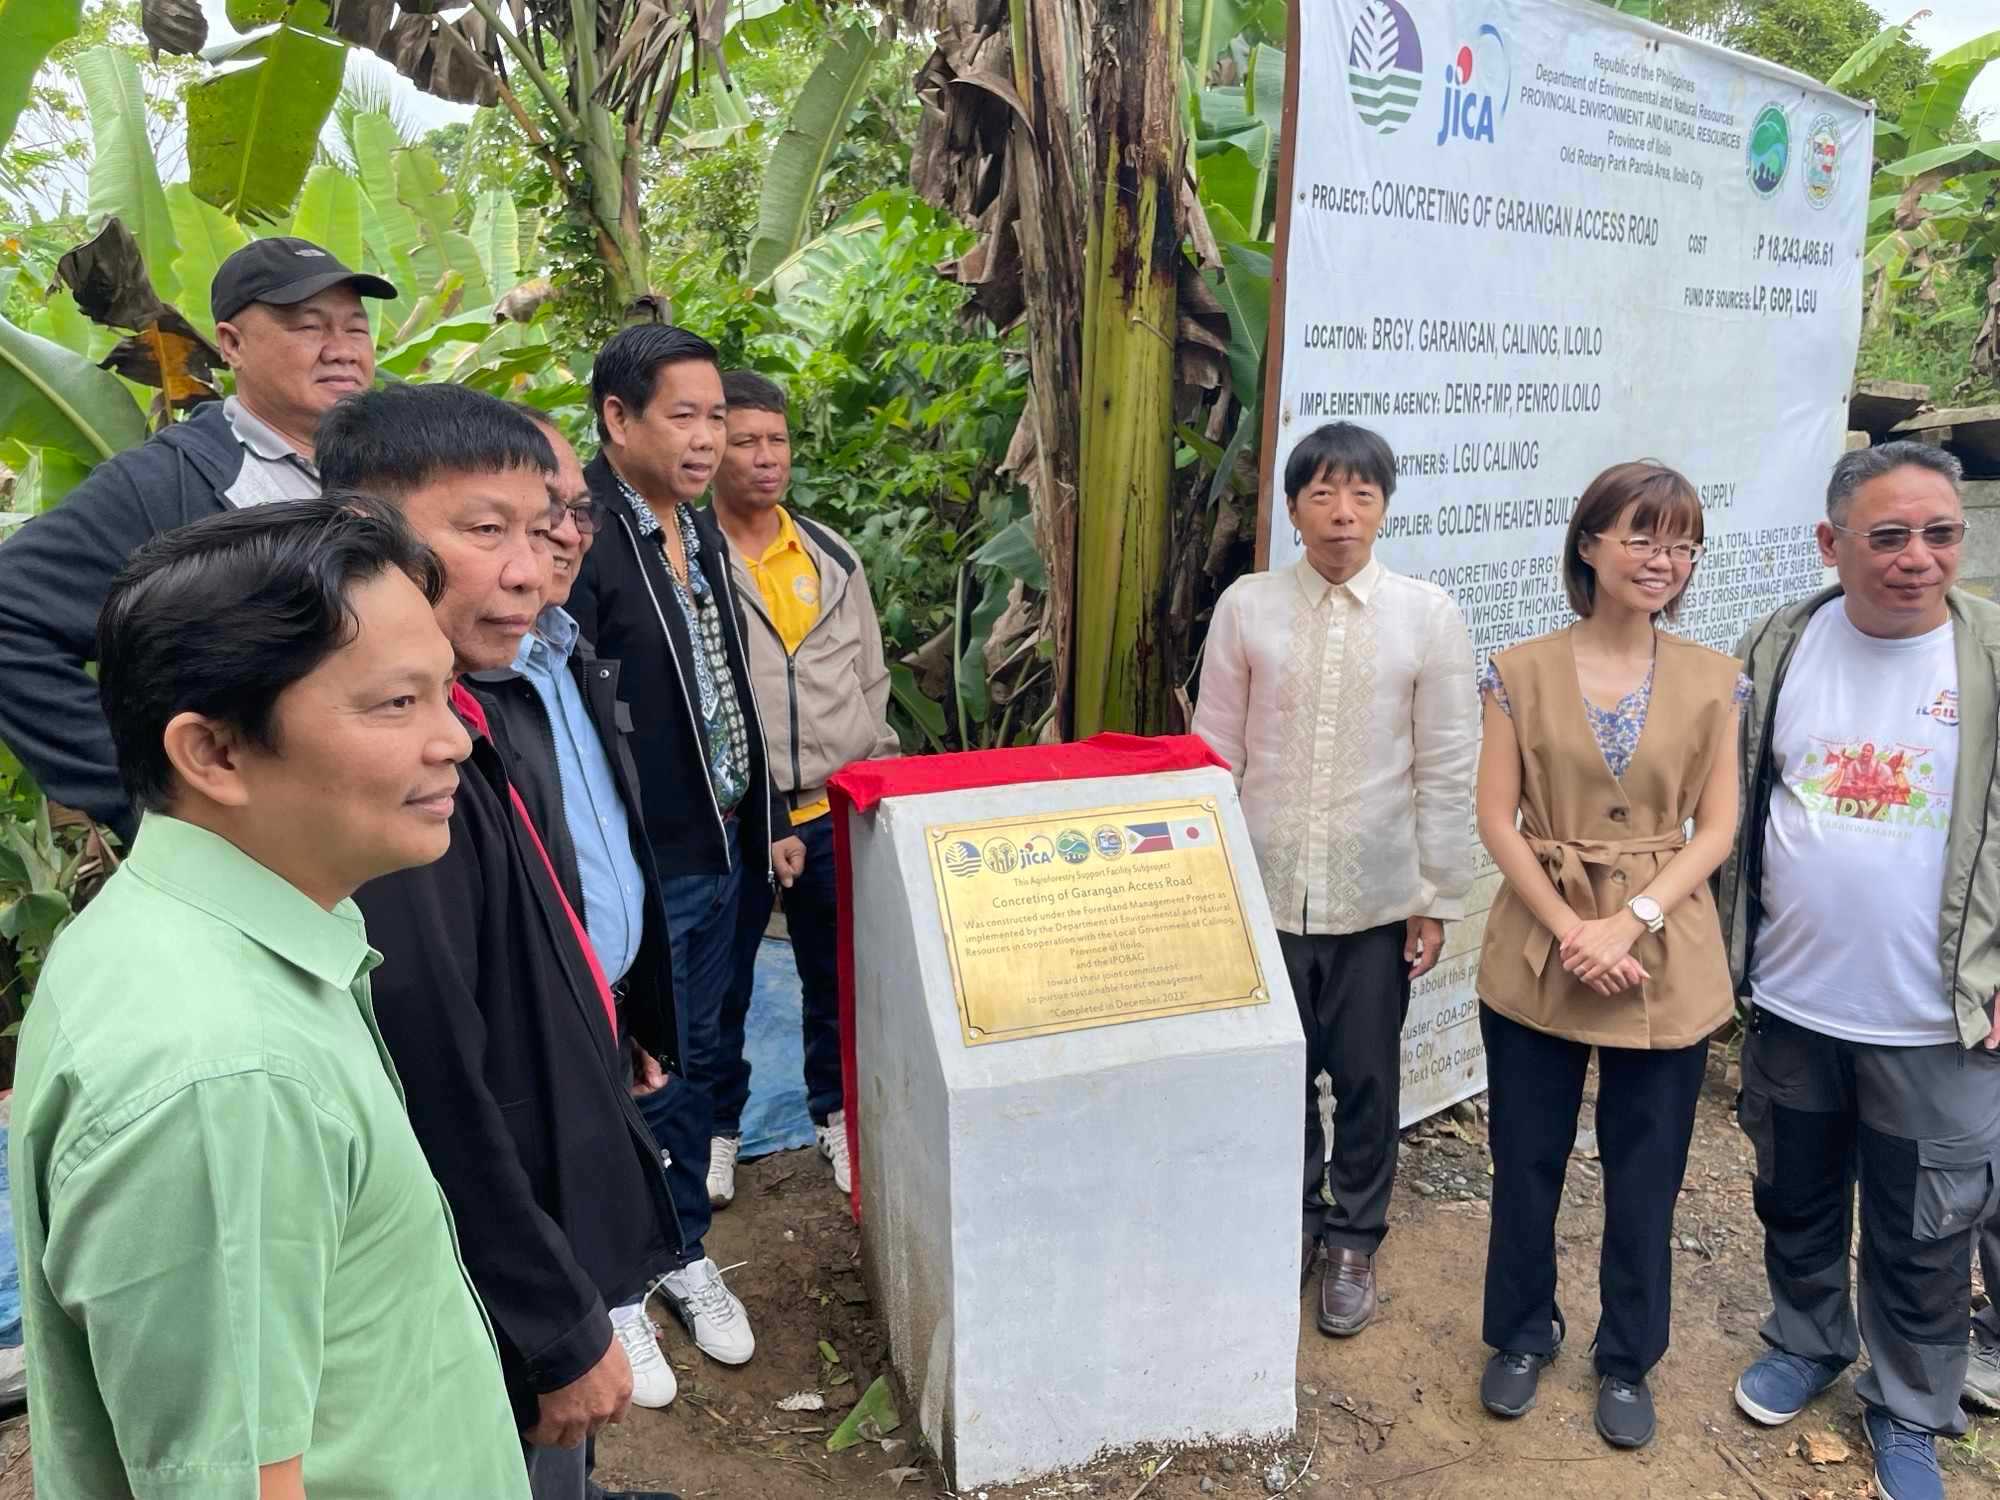 Japan turns over Agroforestry Support Infra to Iloilo